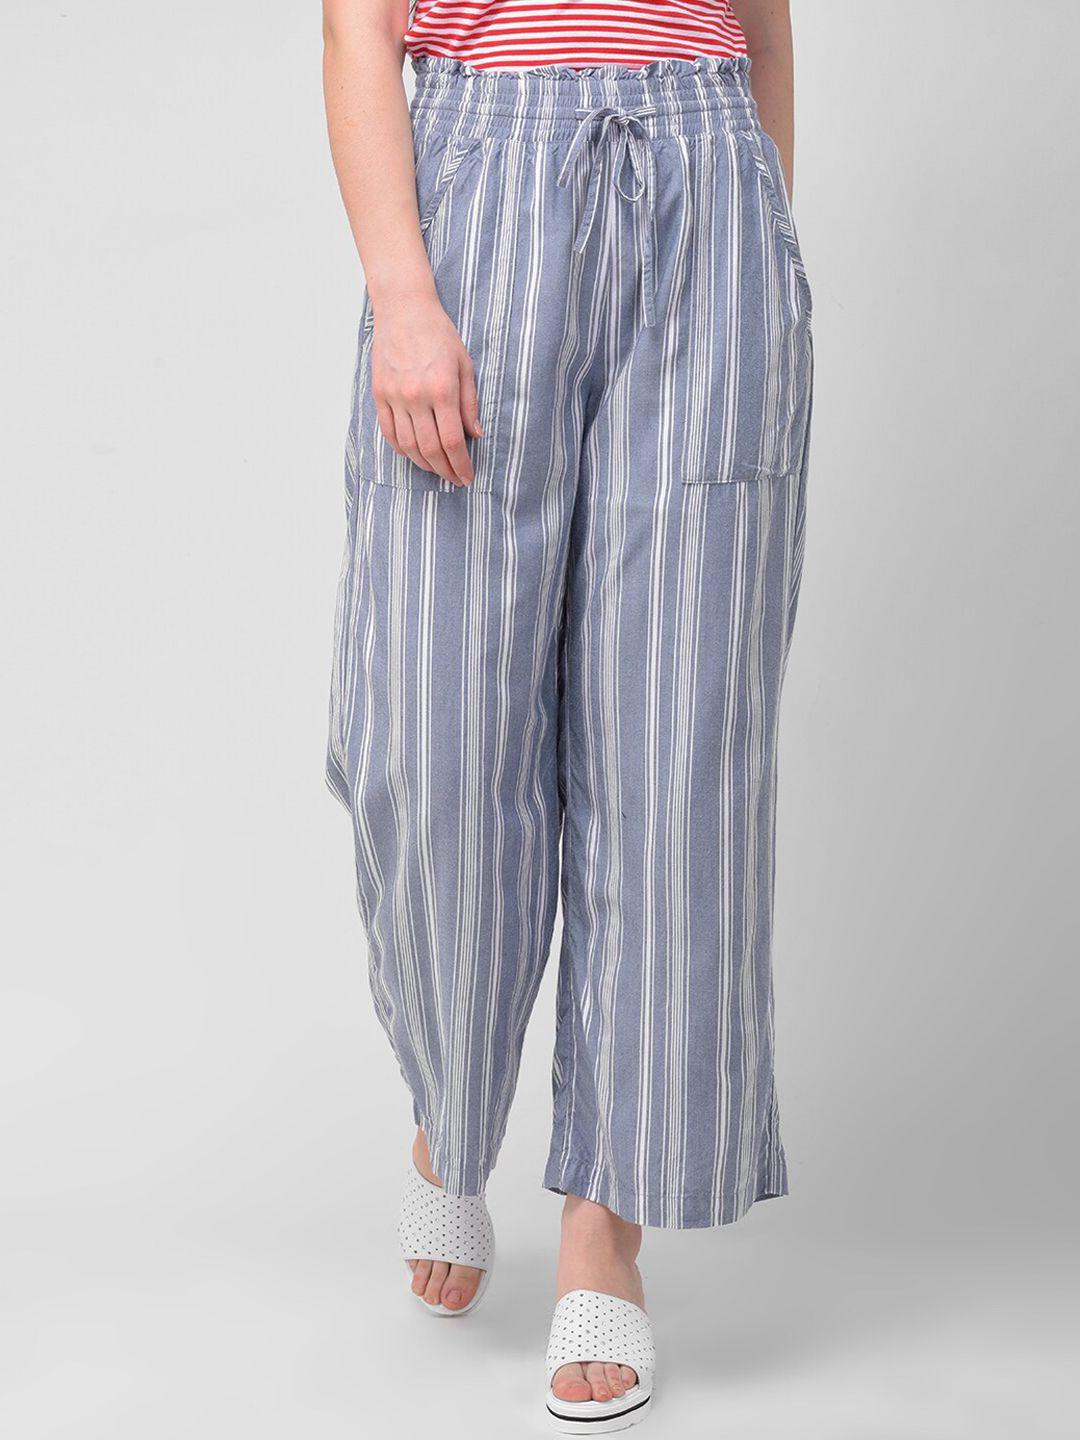 woodland women blue & white striped mid-rise trousers